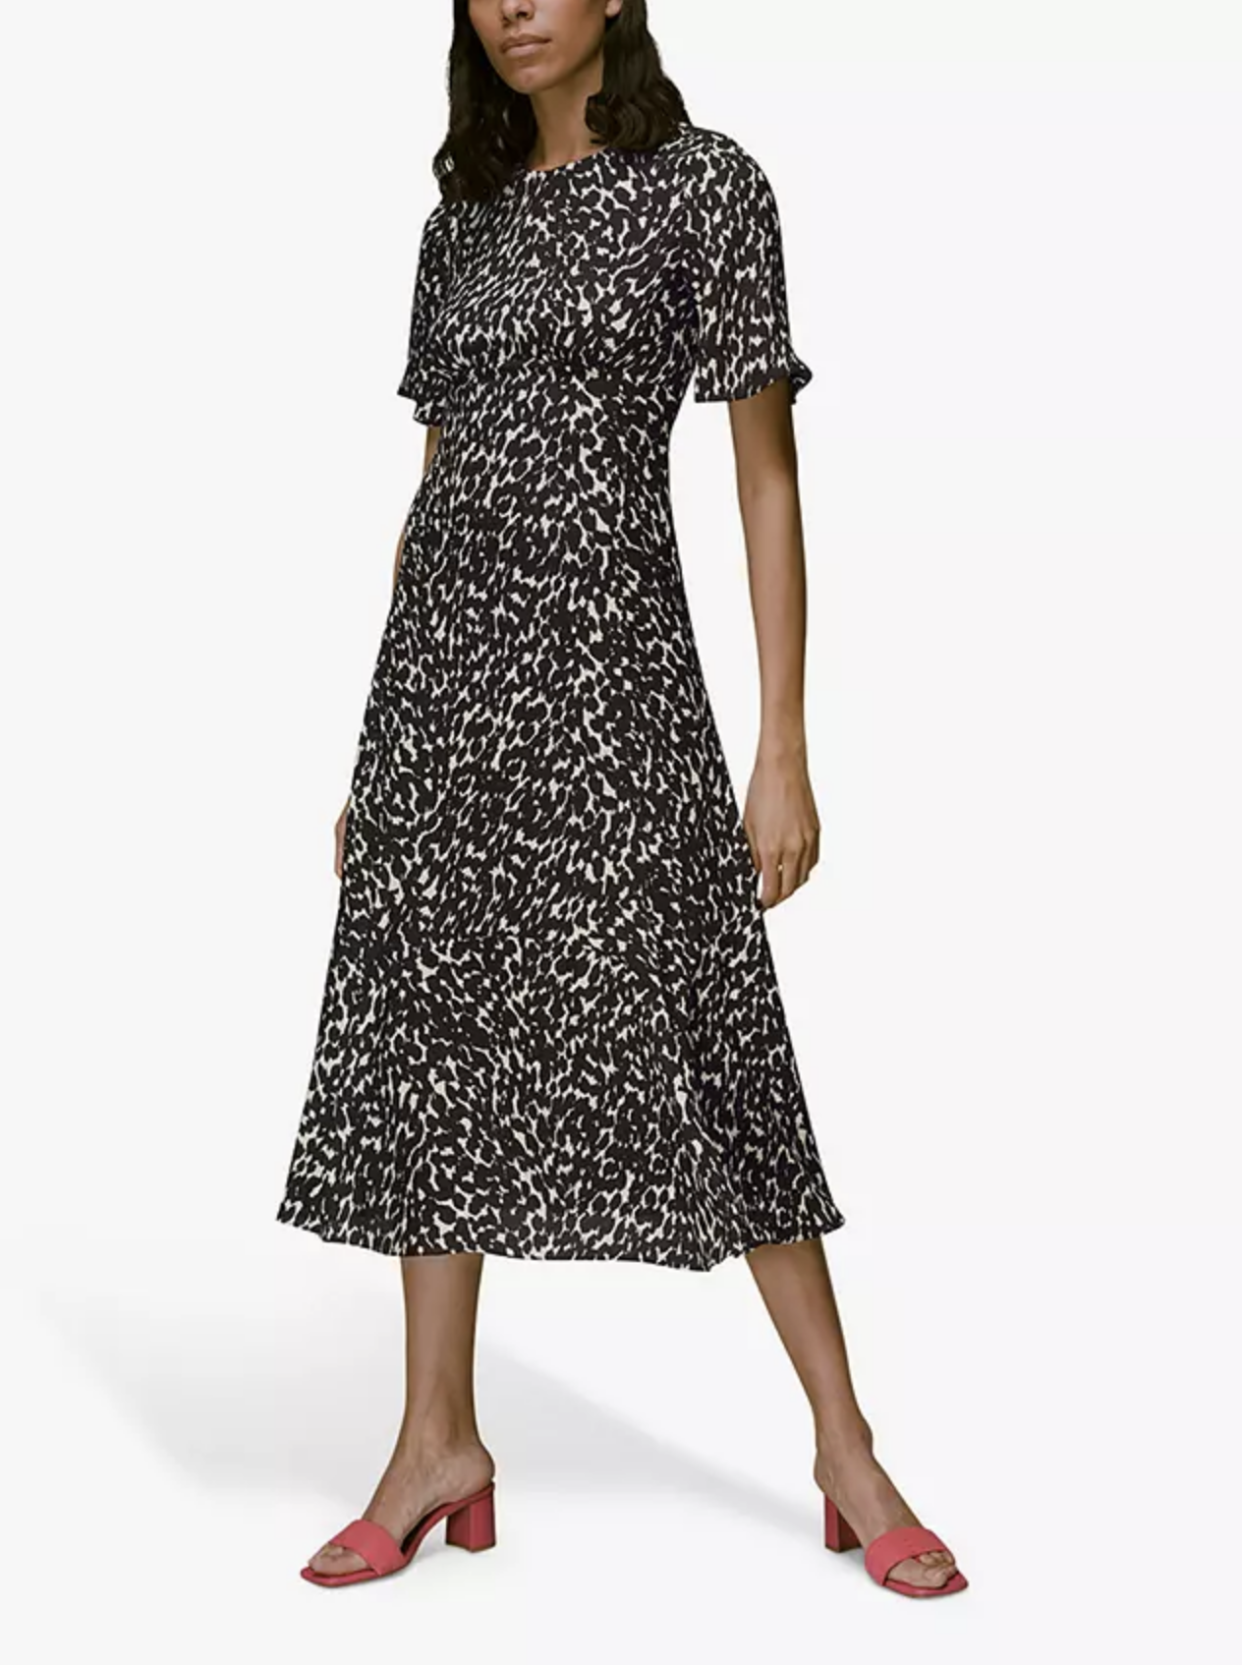 You can never go wrong with a classic Whistles dress. (John Lewis)